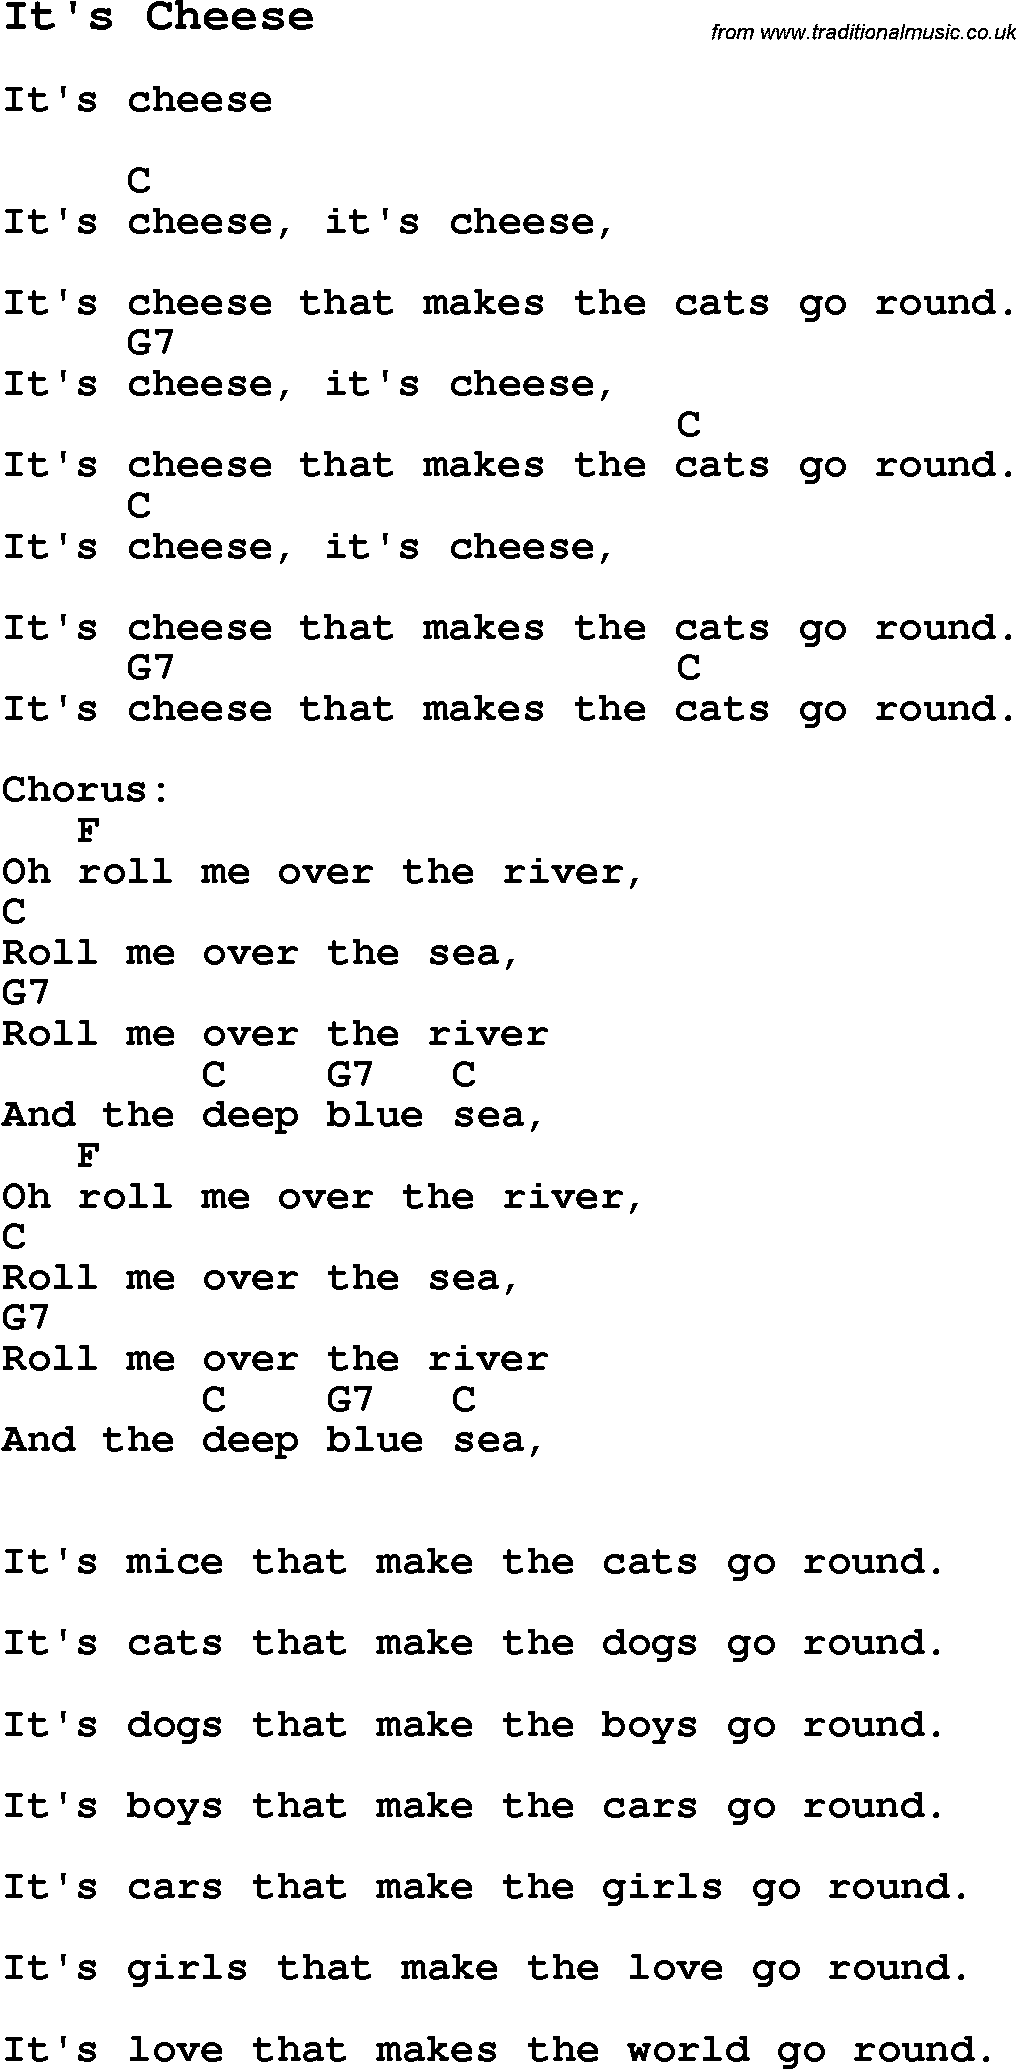 Summer-Camp Song, It's Cheese, with lyrics and chords for Ukulele, Guitar Banjo etc.